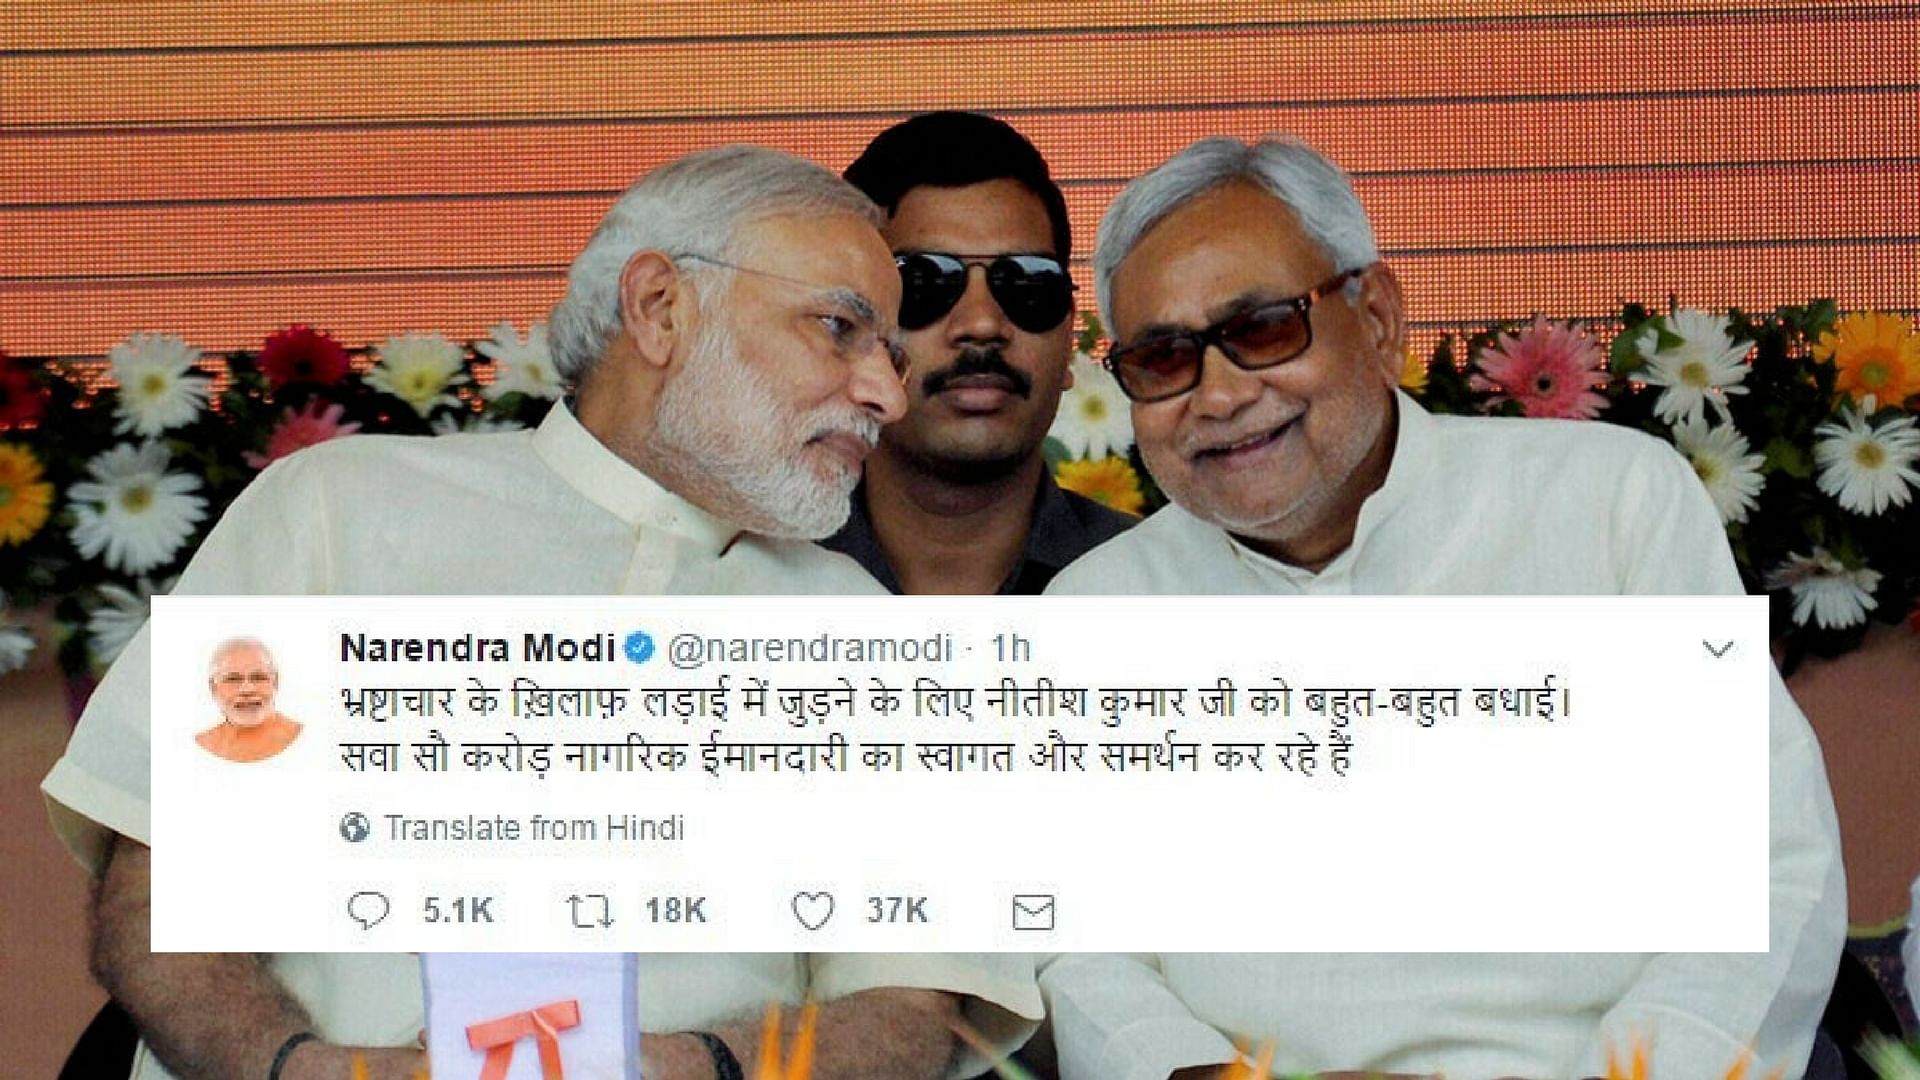 PM Modi congratulated Nitish Kumar on his resignation, saying 125 crore people stand by his honesty.